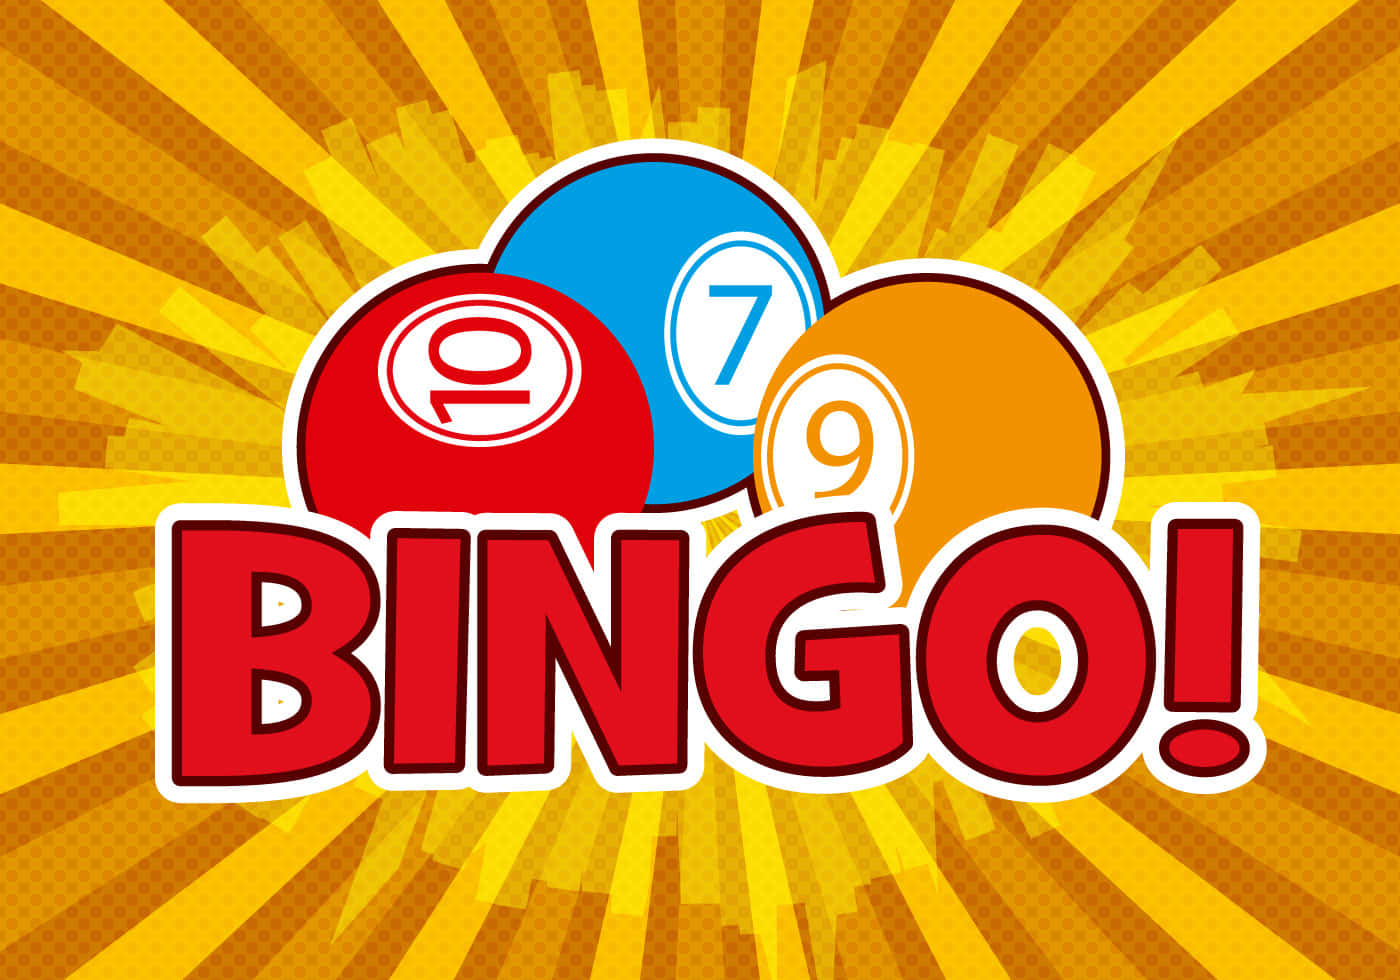 Enjoy a fun night of bingo with friends and family! Wallpaper